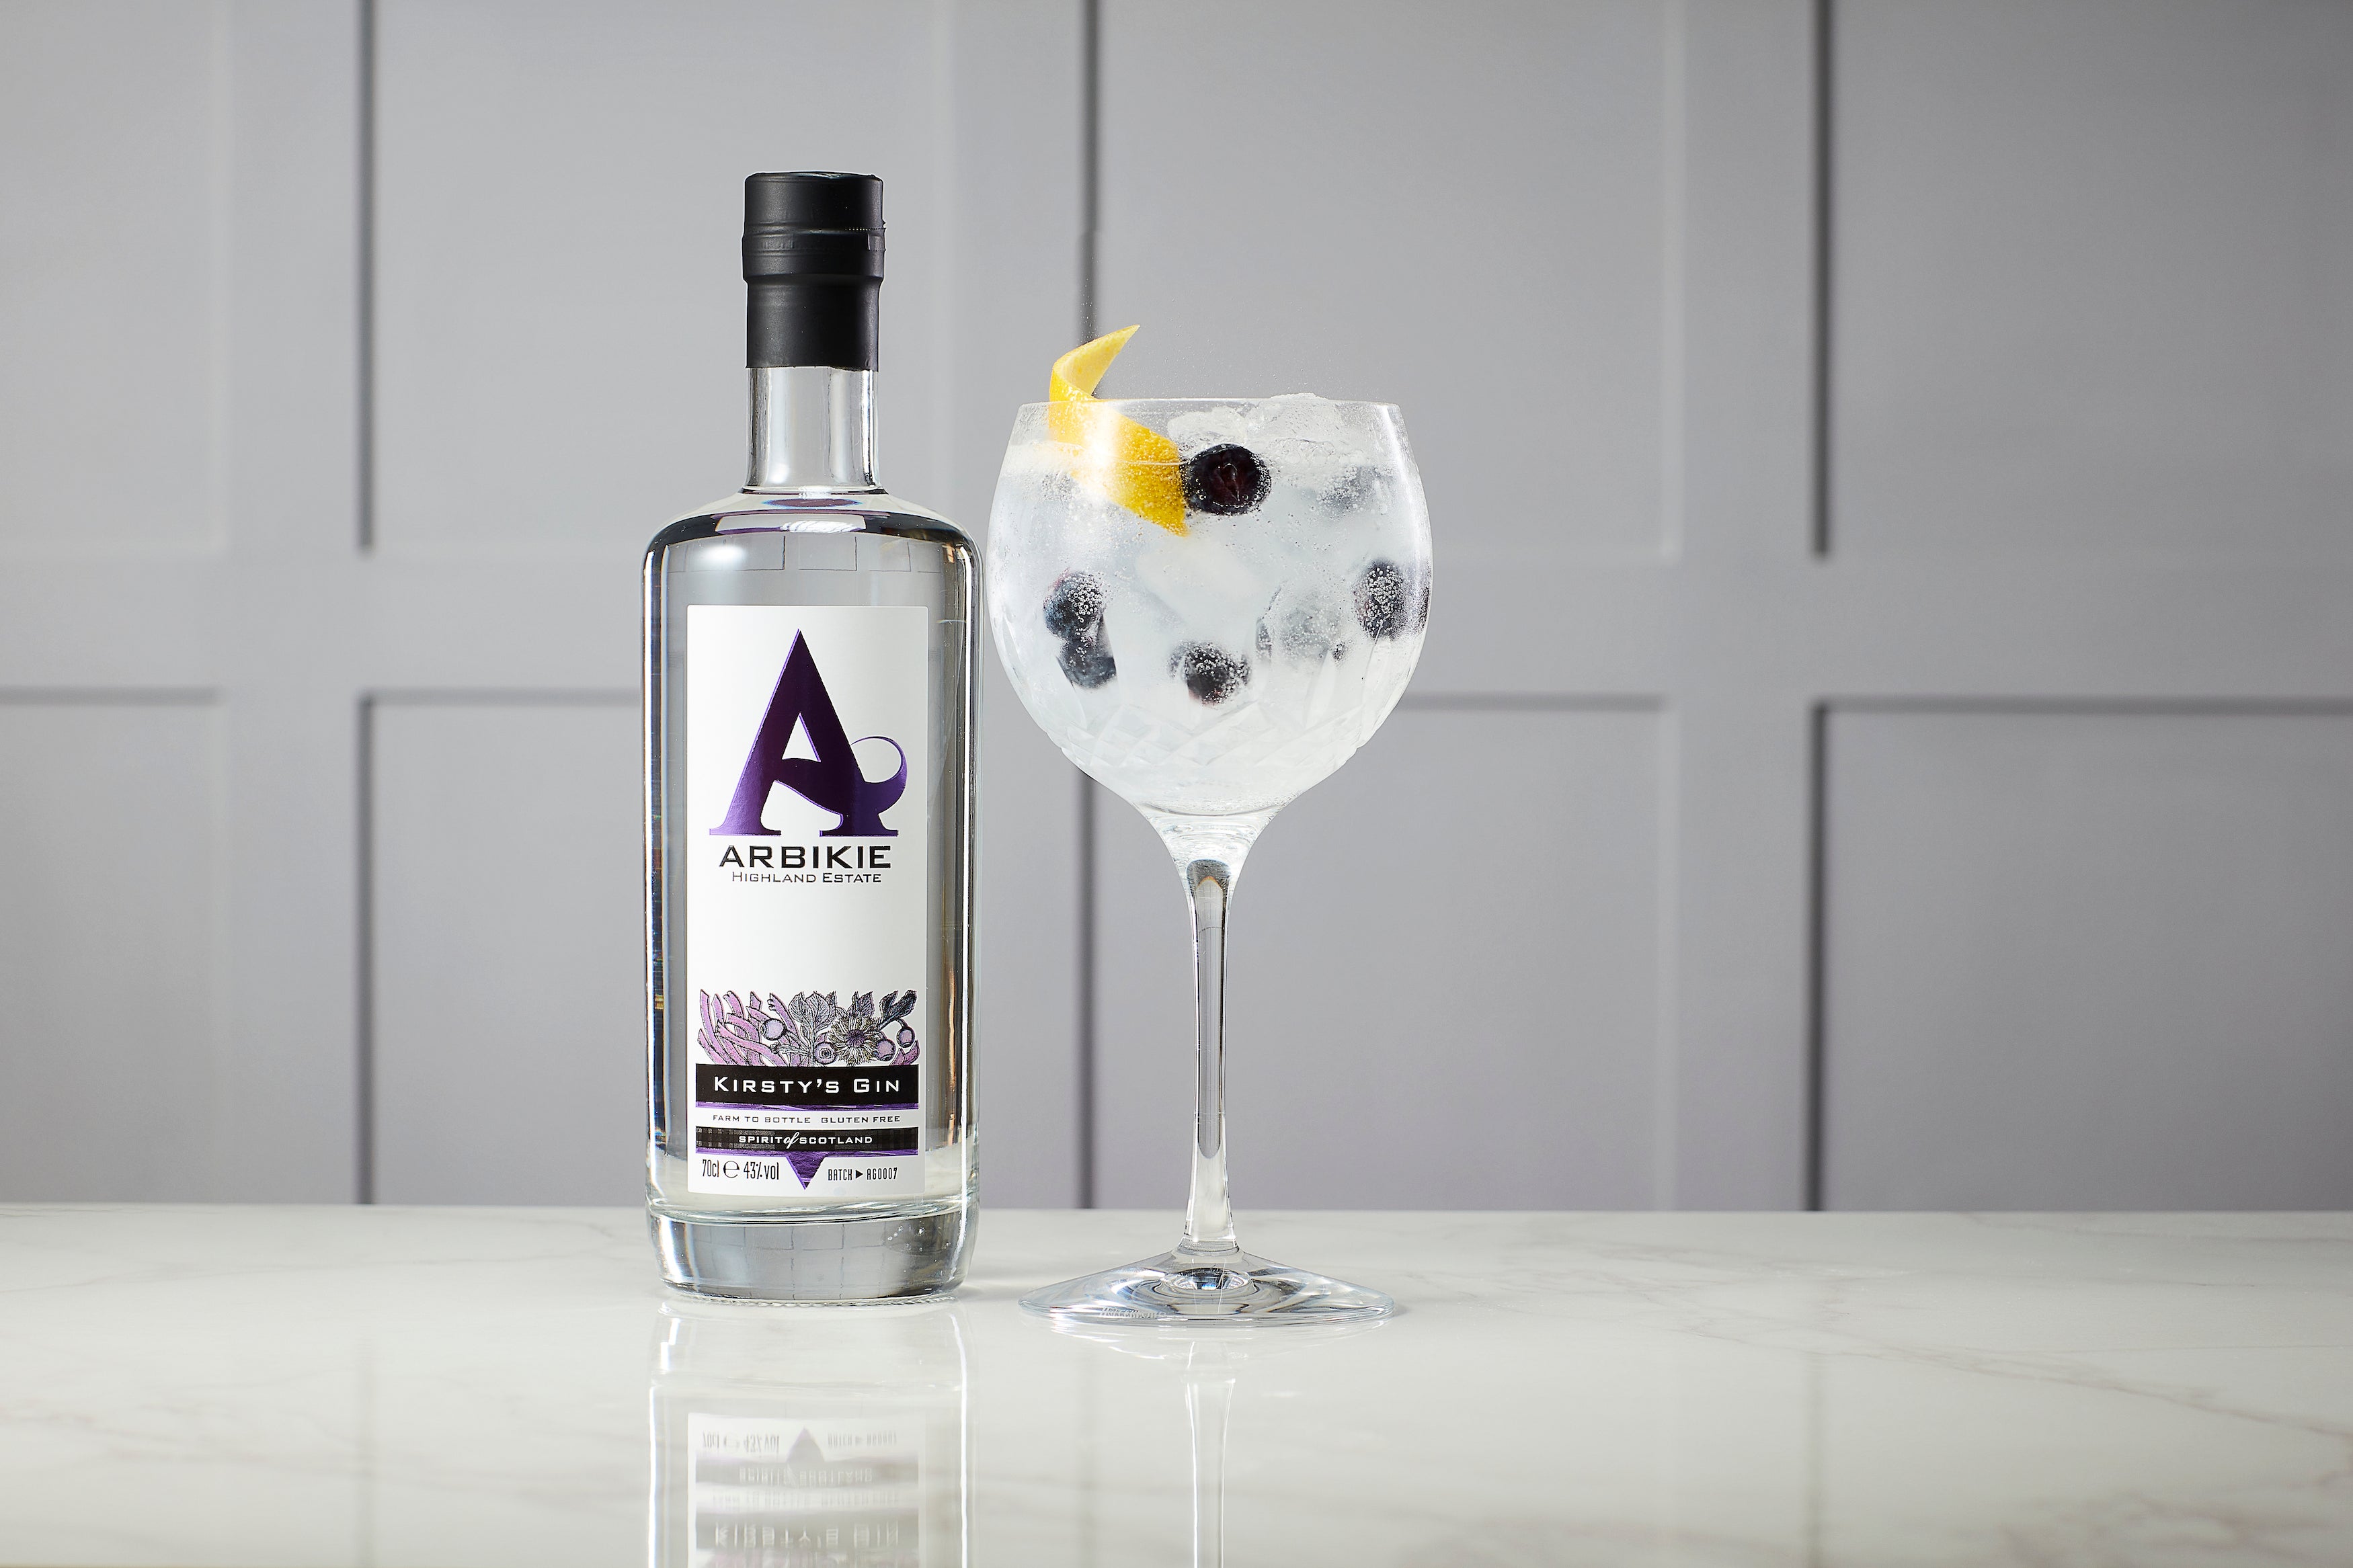 Arbikie kirsty's gin 70cl bottle with gin and tonic